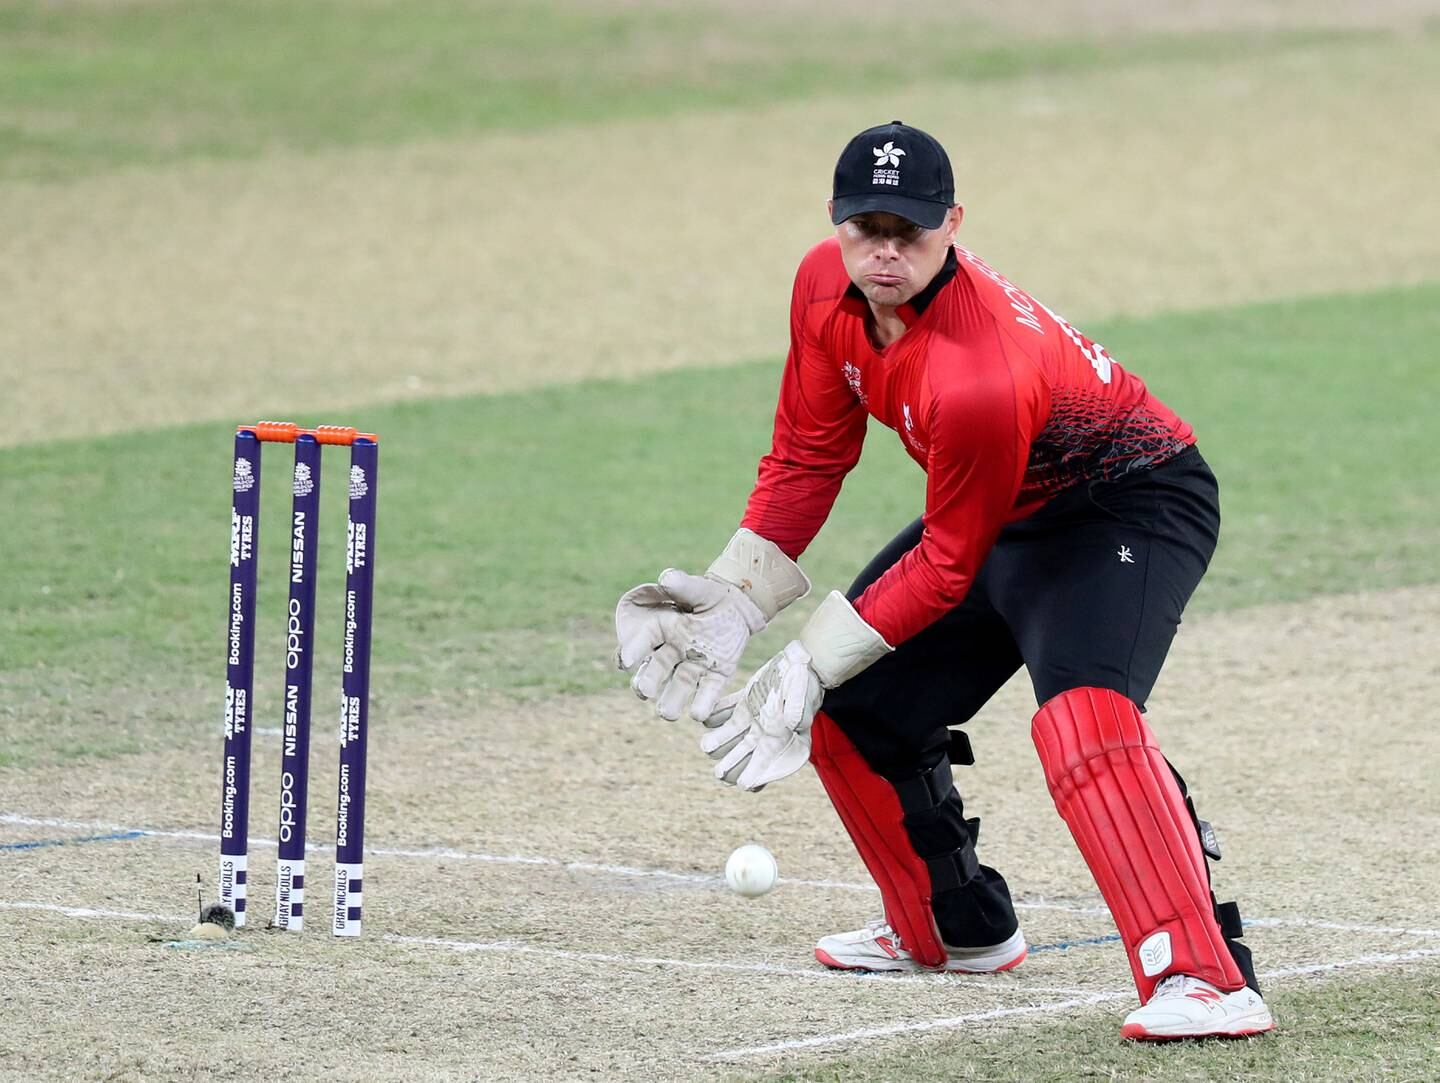 Dubai, United Arab Emirates - October 30, 2019: Hong Kong's keeper Scott McKechnie during the game between Oman and Hong Kong in the World Cup Qualifier at the Dubai International Cricket Stadium. Wednesday the 30th of October 2019. Sports City, Dubai. Chris Whiteoak / The National